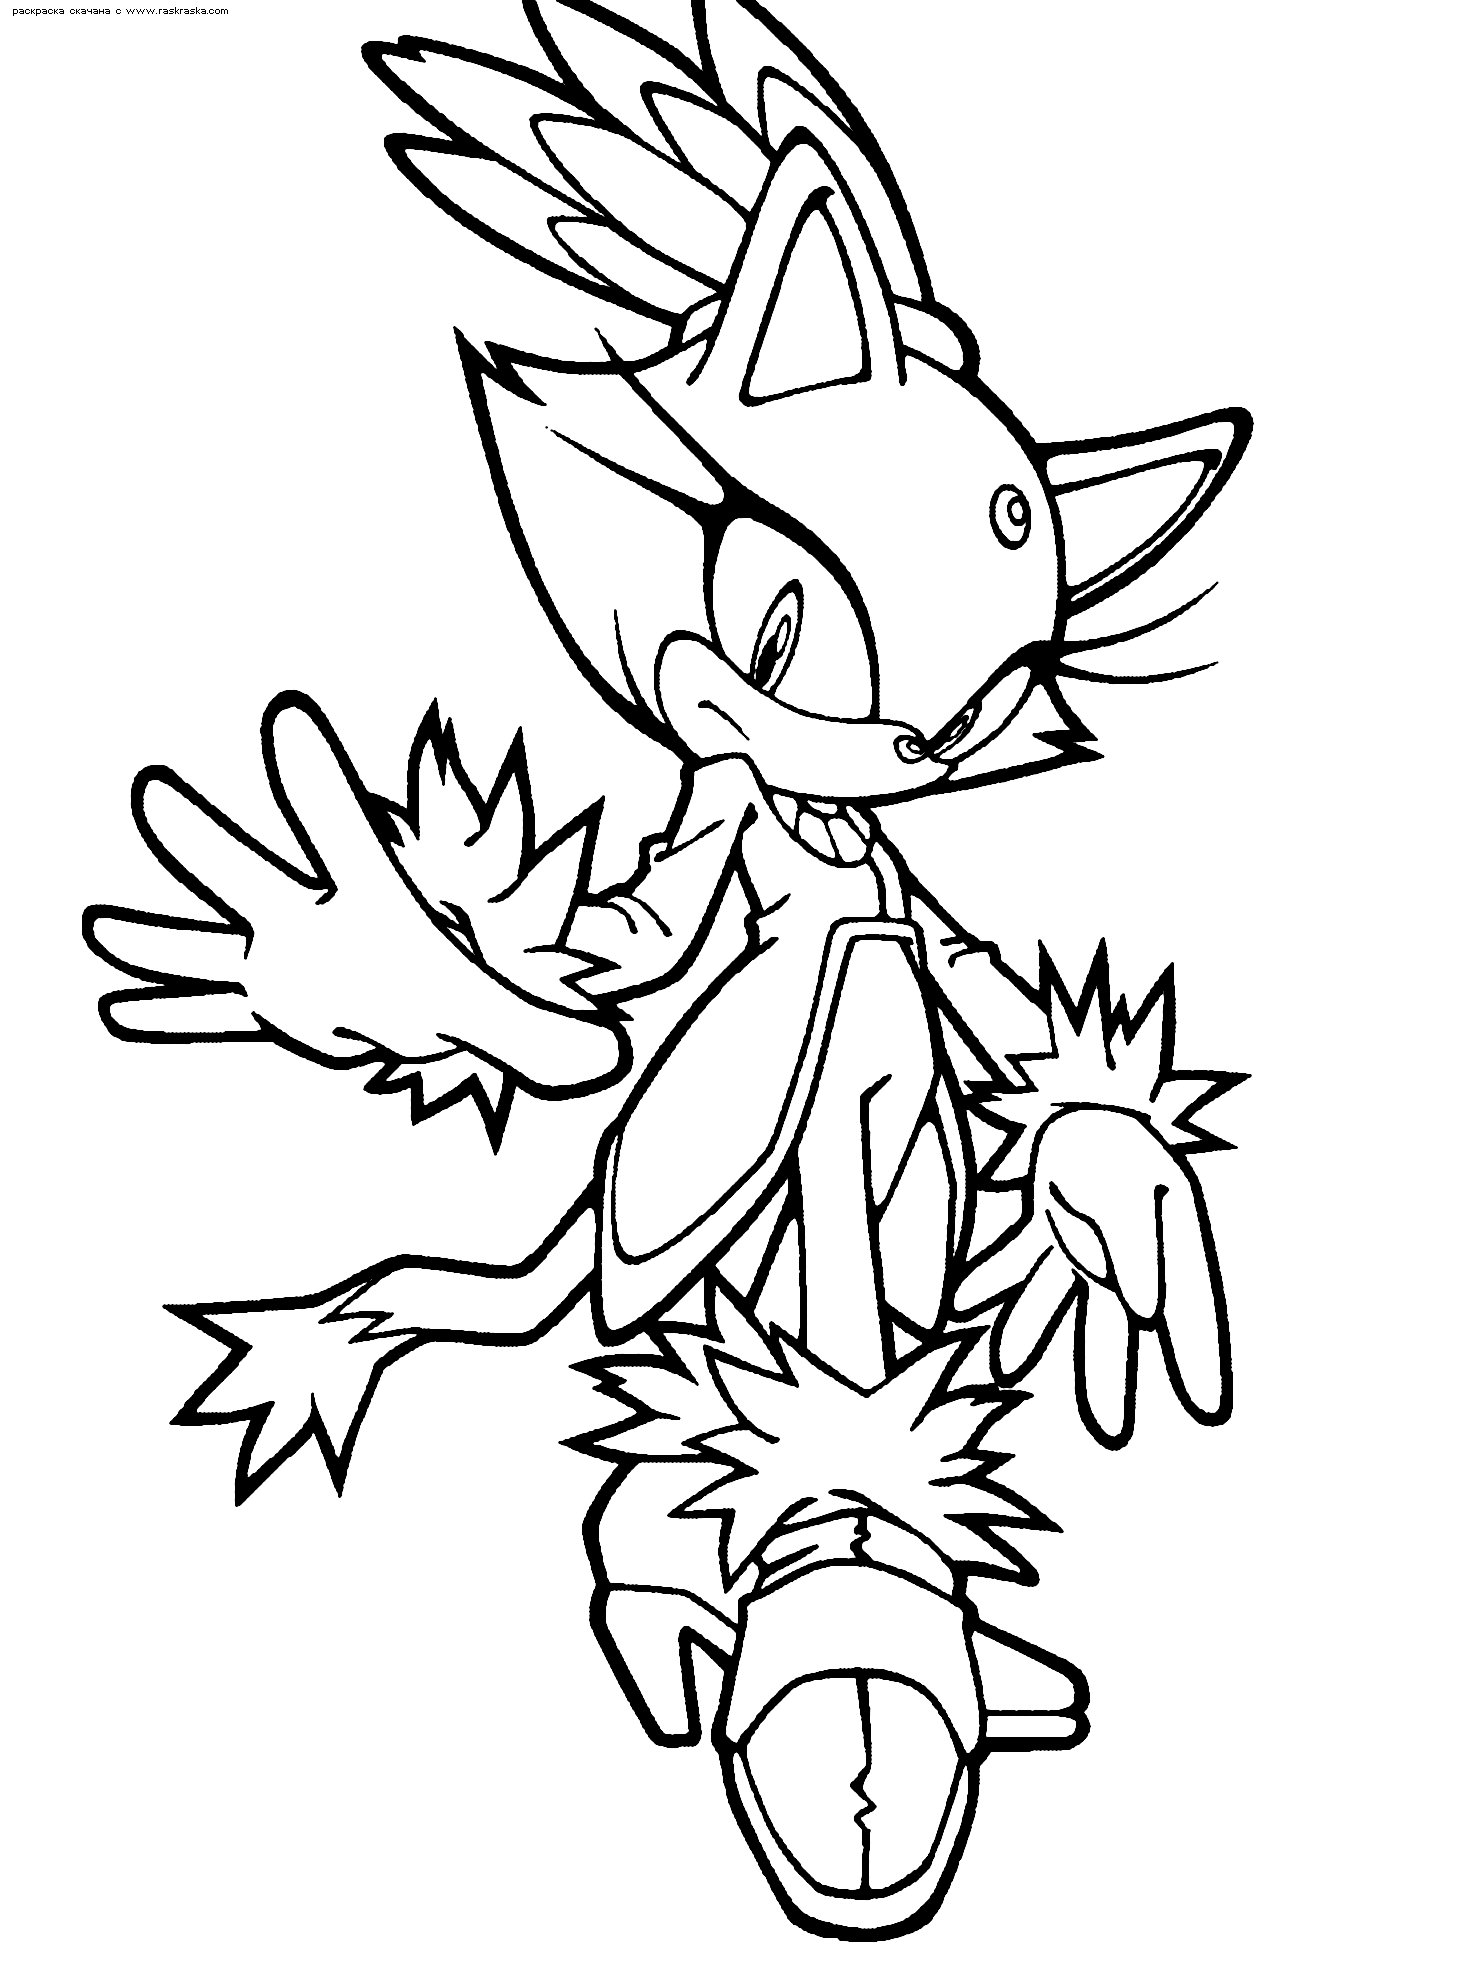 Sonic Coloring Pages (3) - Coloring Kids